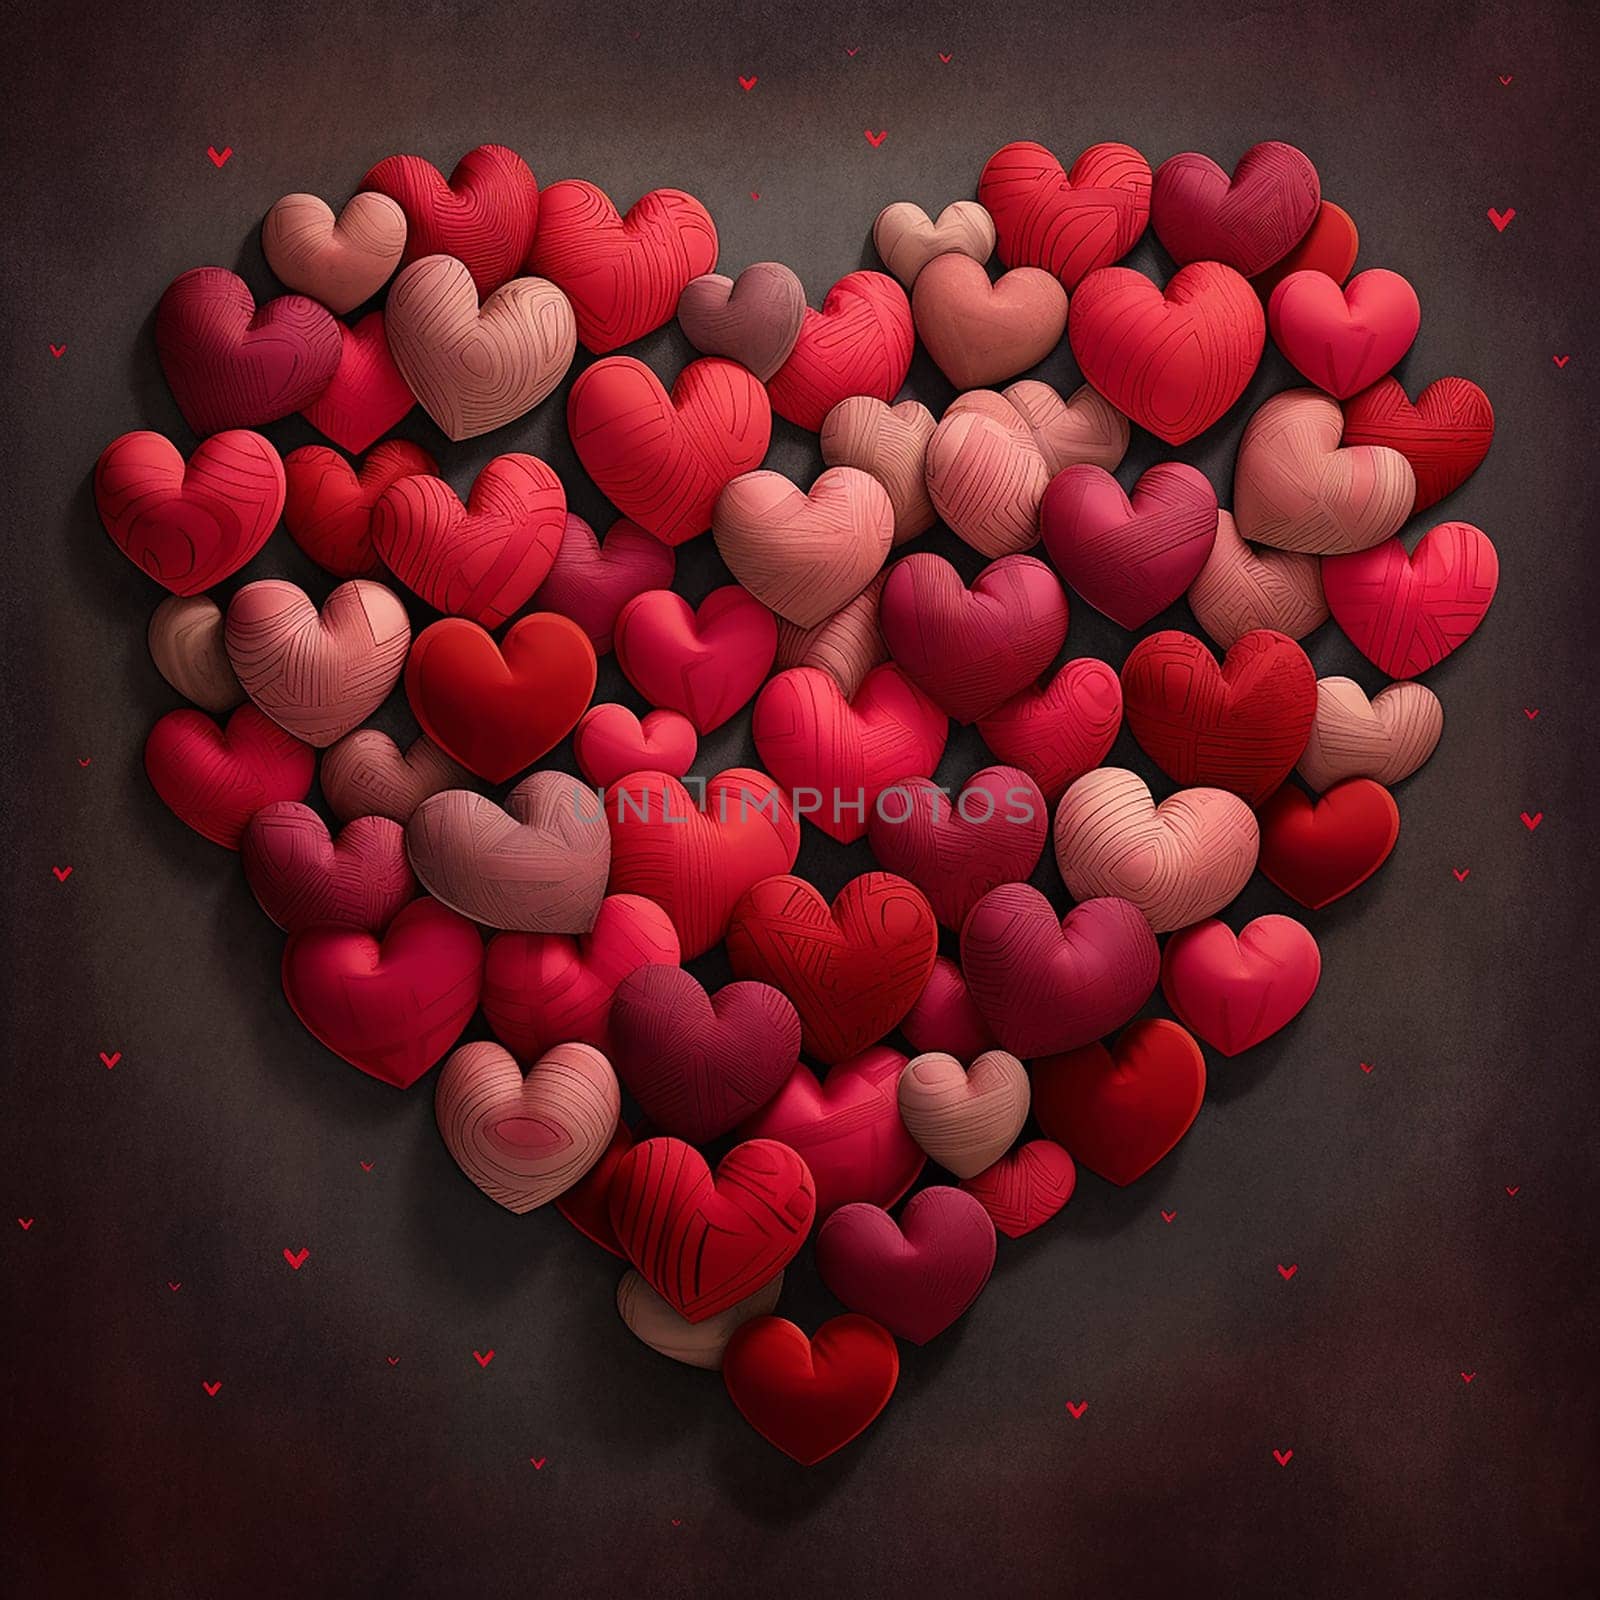 A collection of red and pink hearts forming a larger heart shape.